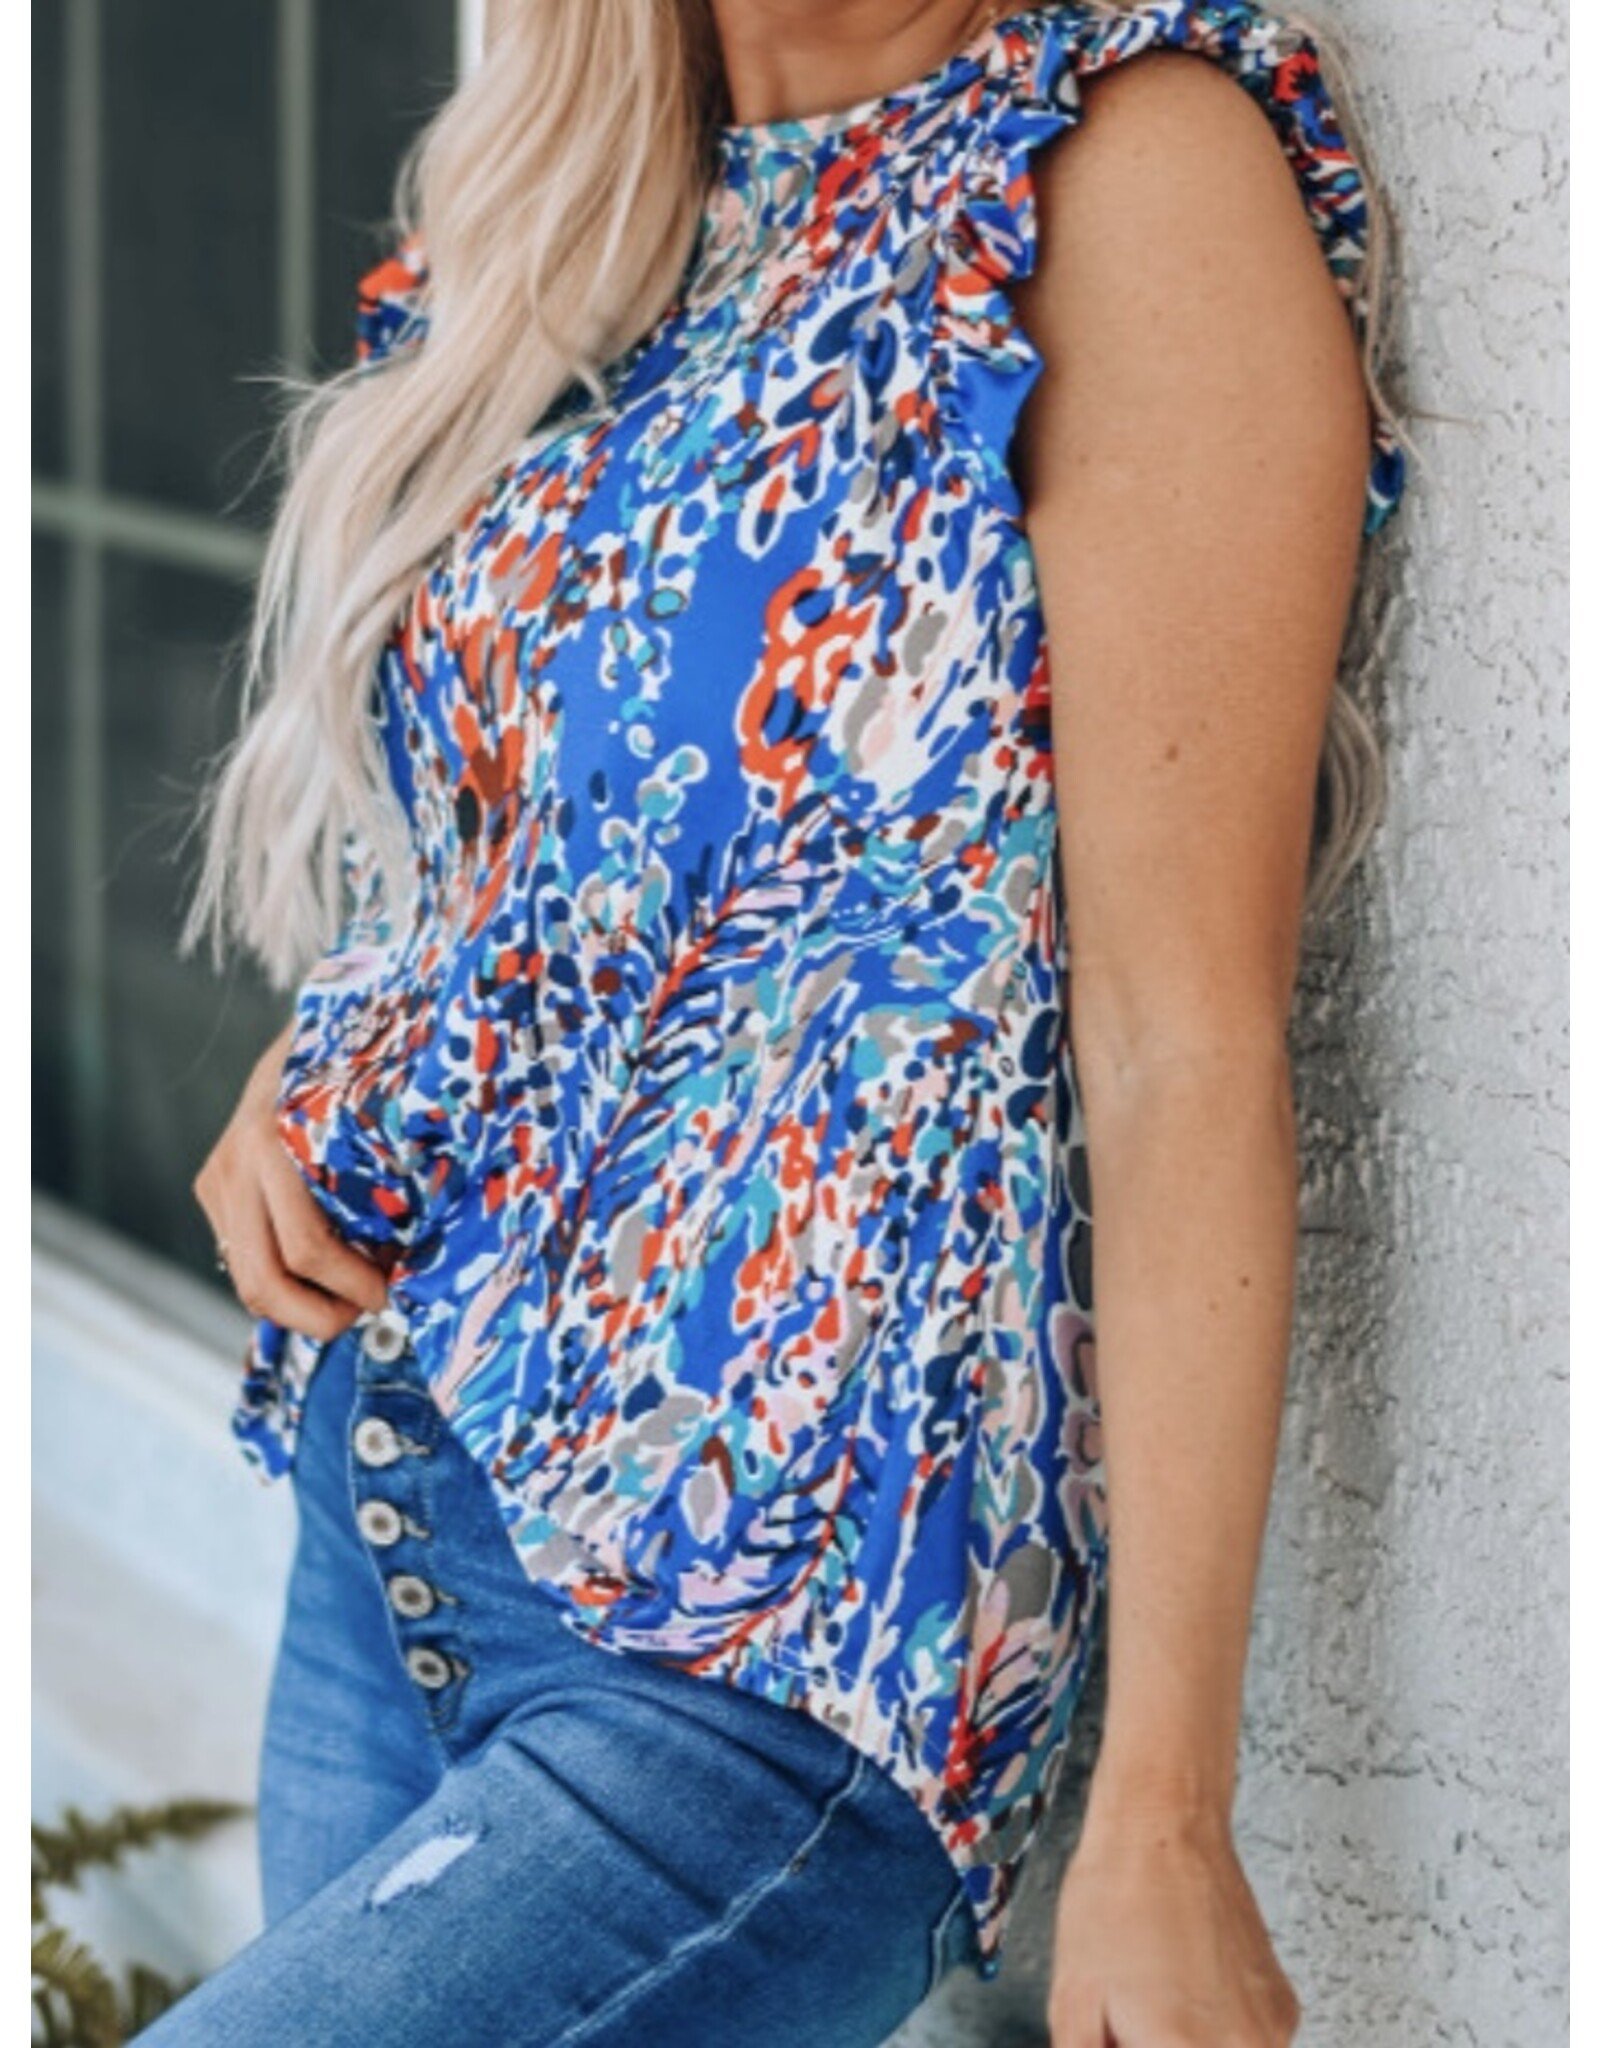 LATA Floral Print Tank Top with Ruffles